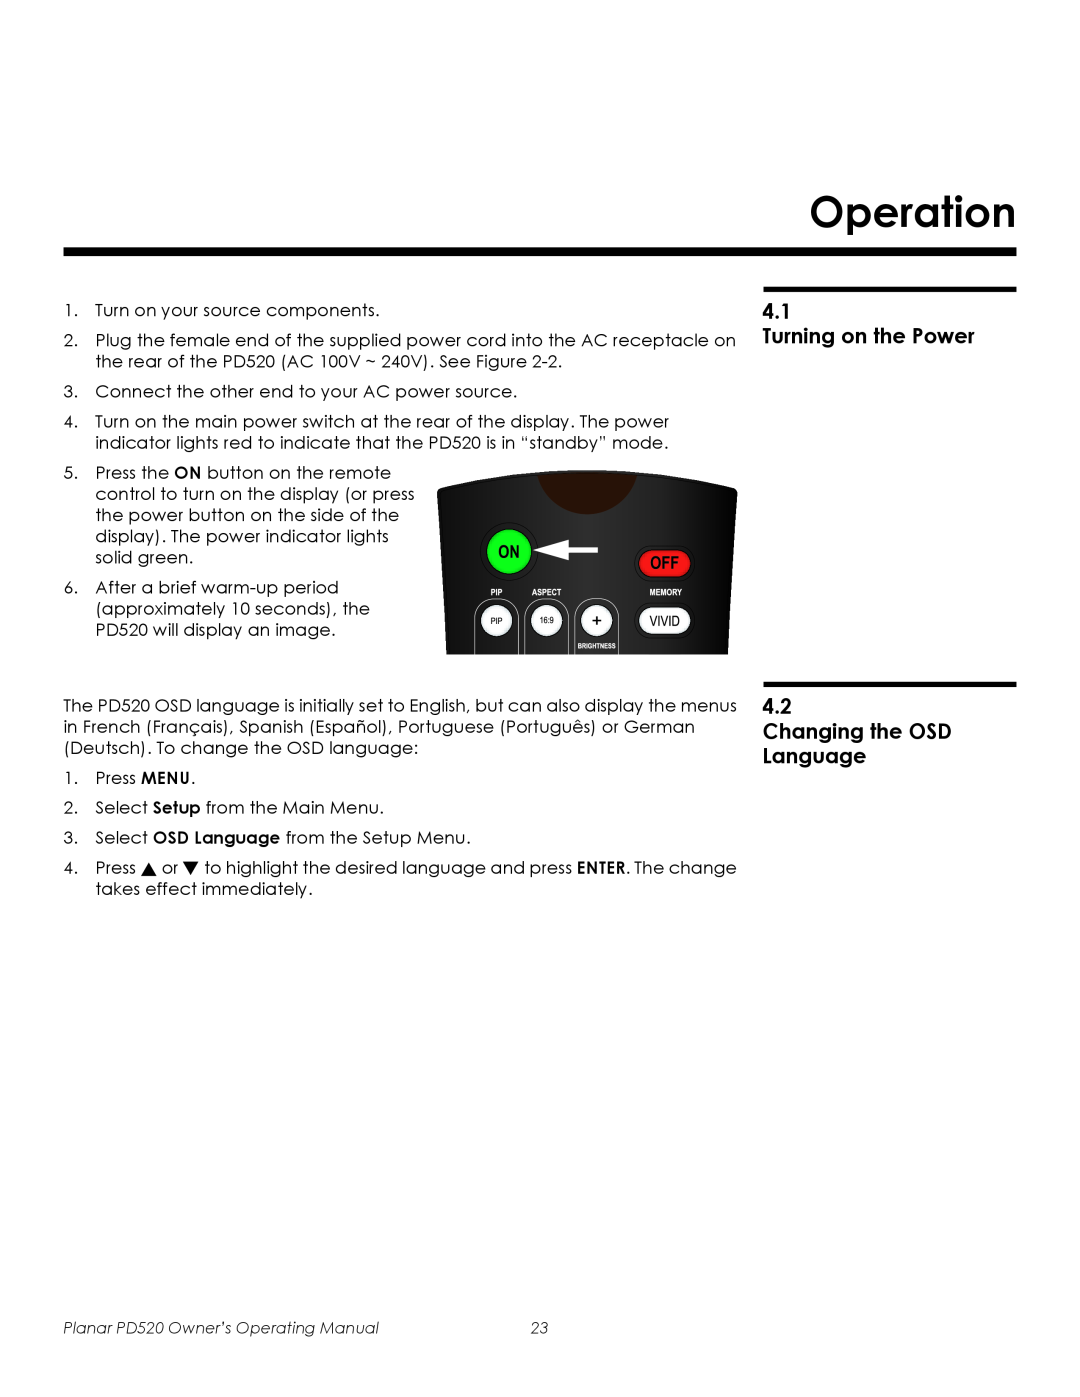 Planar PD520 manual Operation, Turning on the Power, Changing the OSD Language 